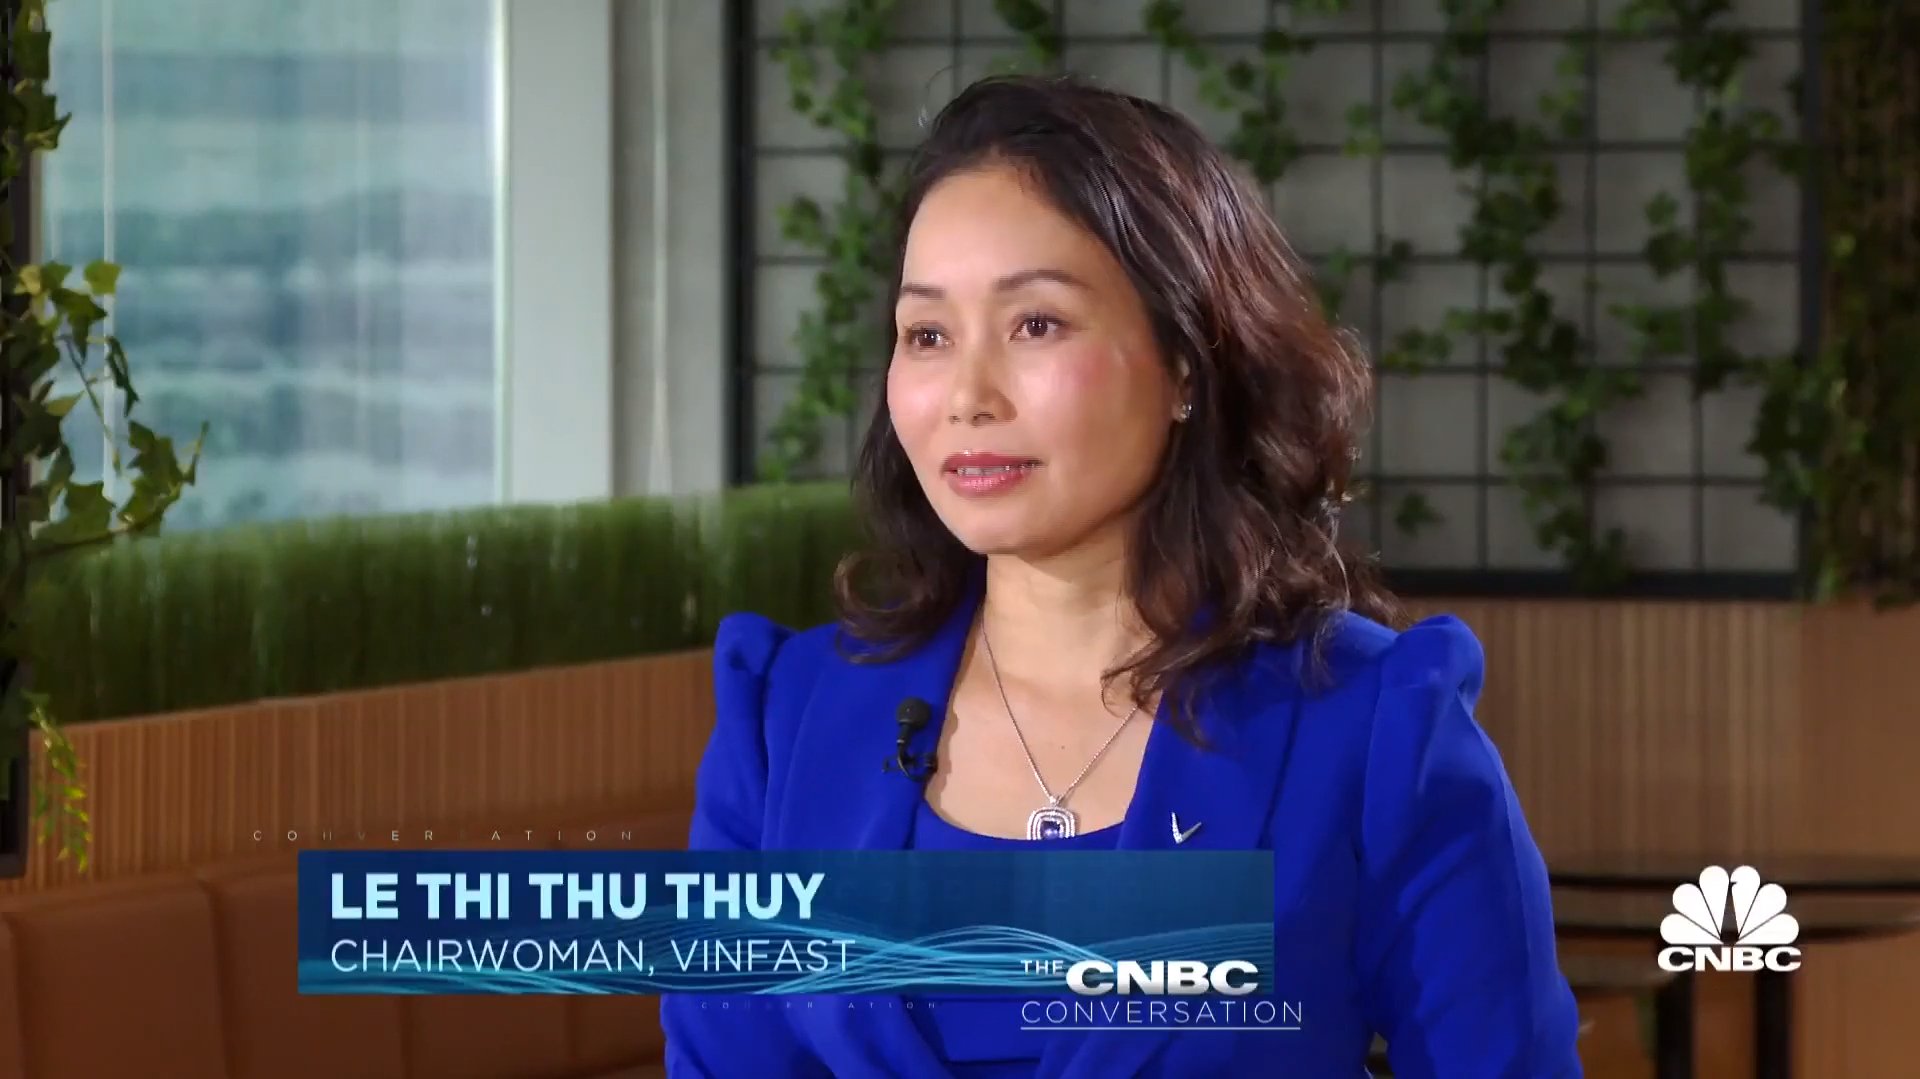 Le Thi Thu Thuy, VinFast chairwoman. Photo courtesy of CNBC.